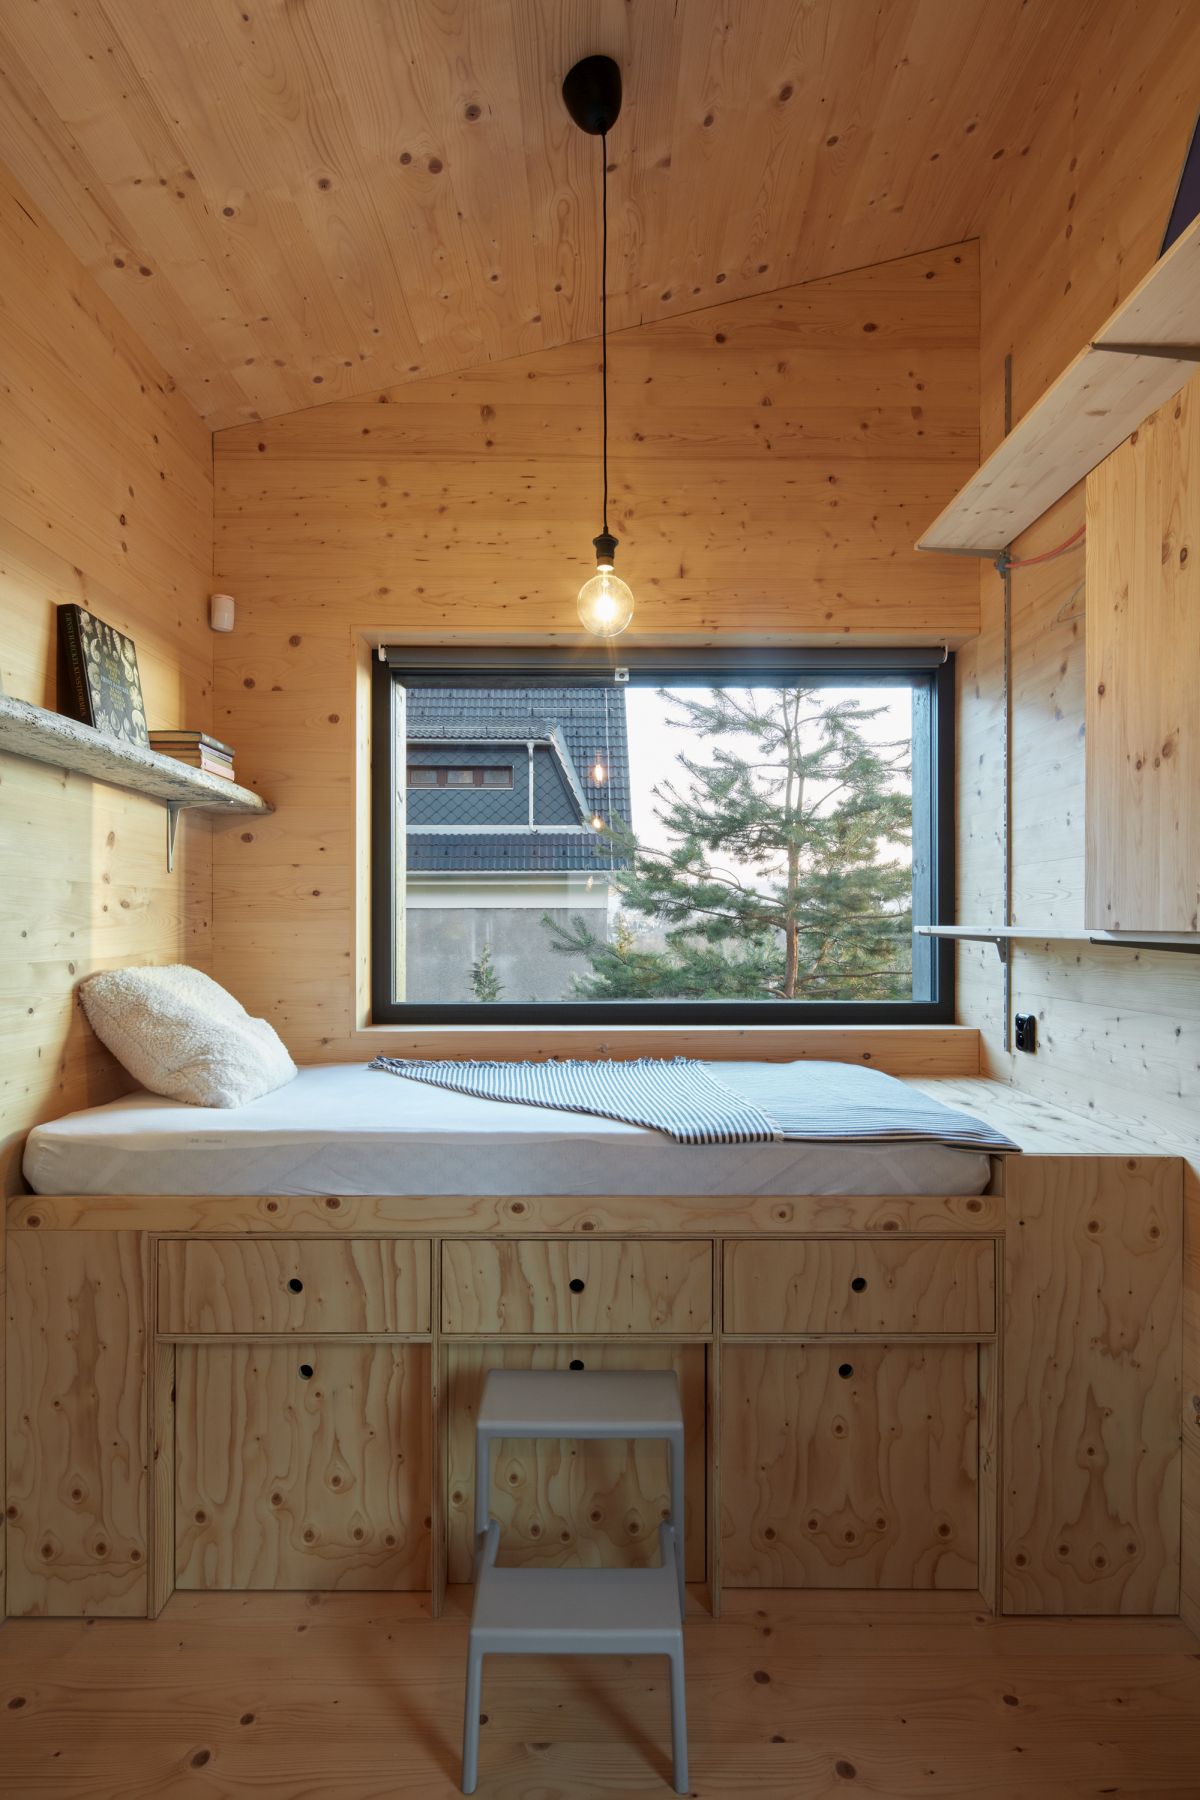 The bedrooms feature clever storage solutions which make up for the small footprint